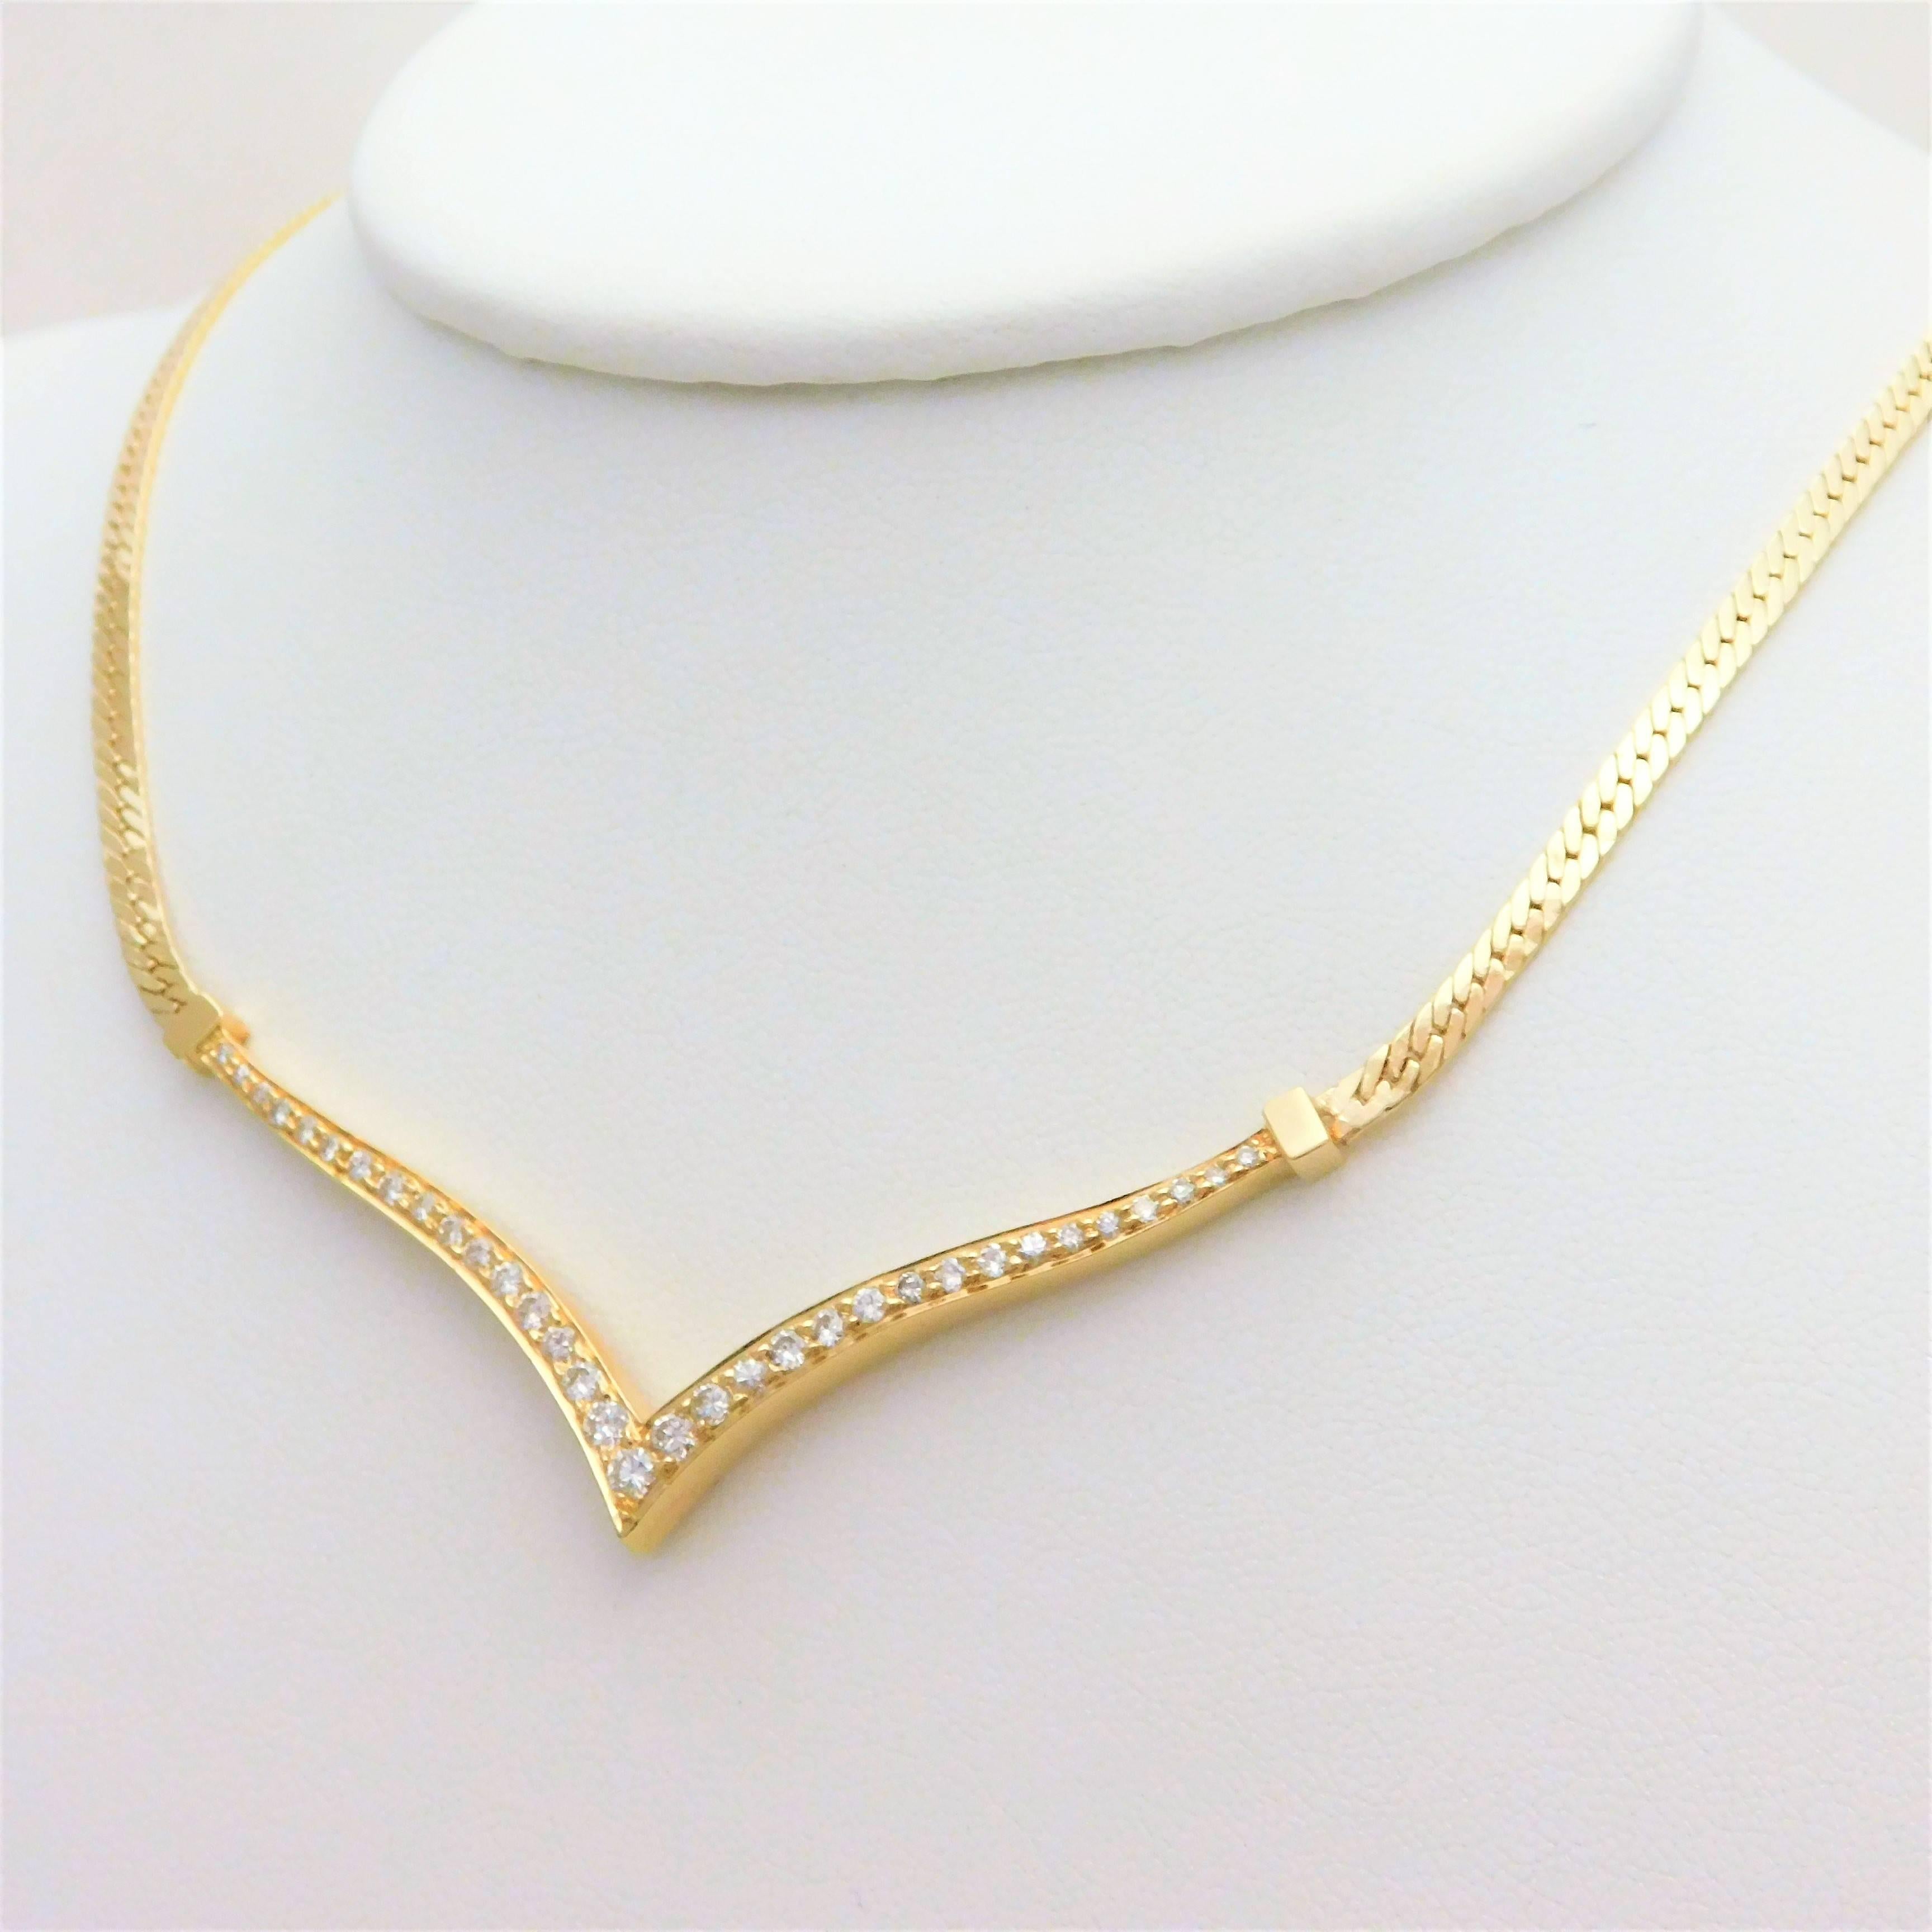 Vintage 14 Karat Gold V Diamond Pendant Necklace In Excellent Condition For Sale In Metairie, LA